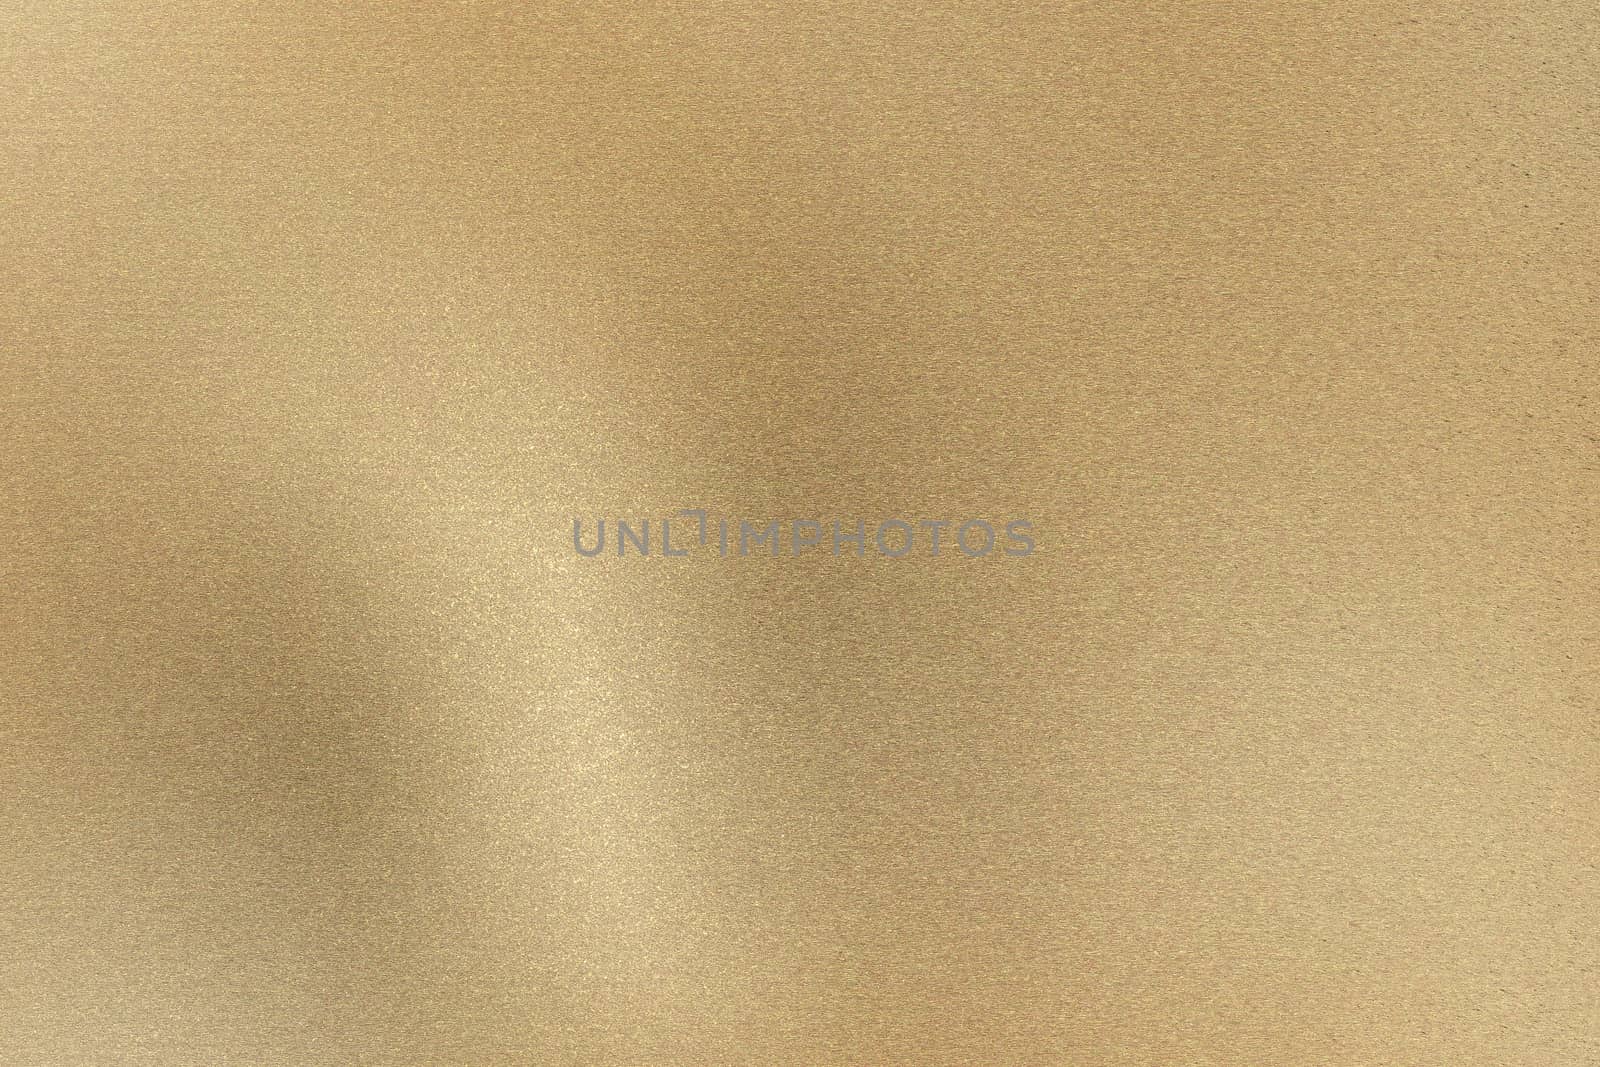 Glowing light brown brushed metal wall, abstract texture background